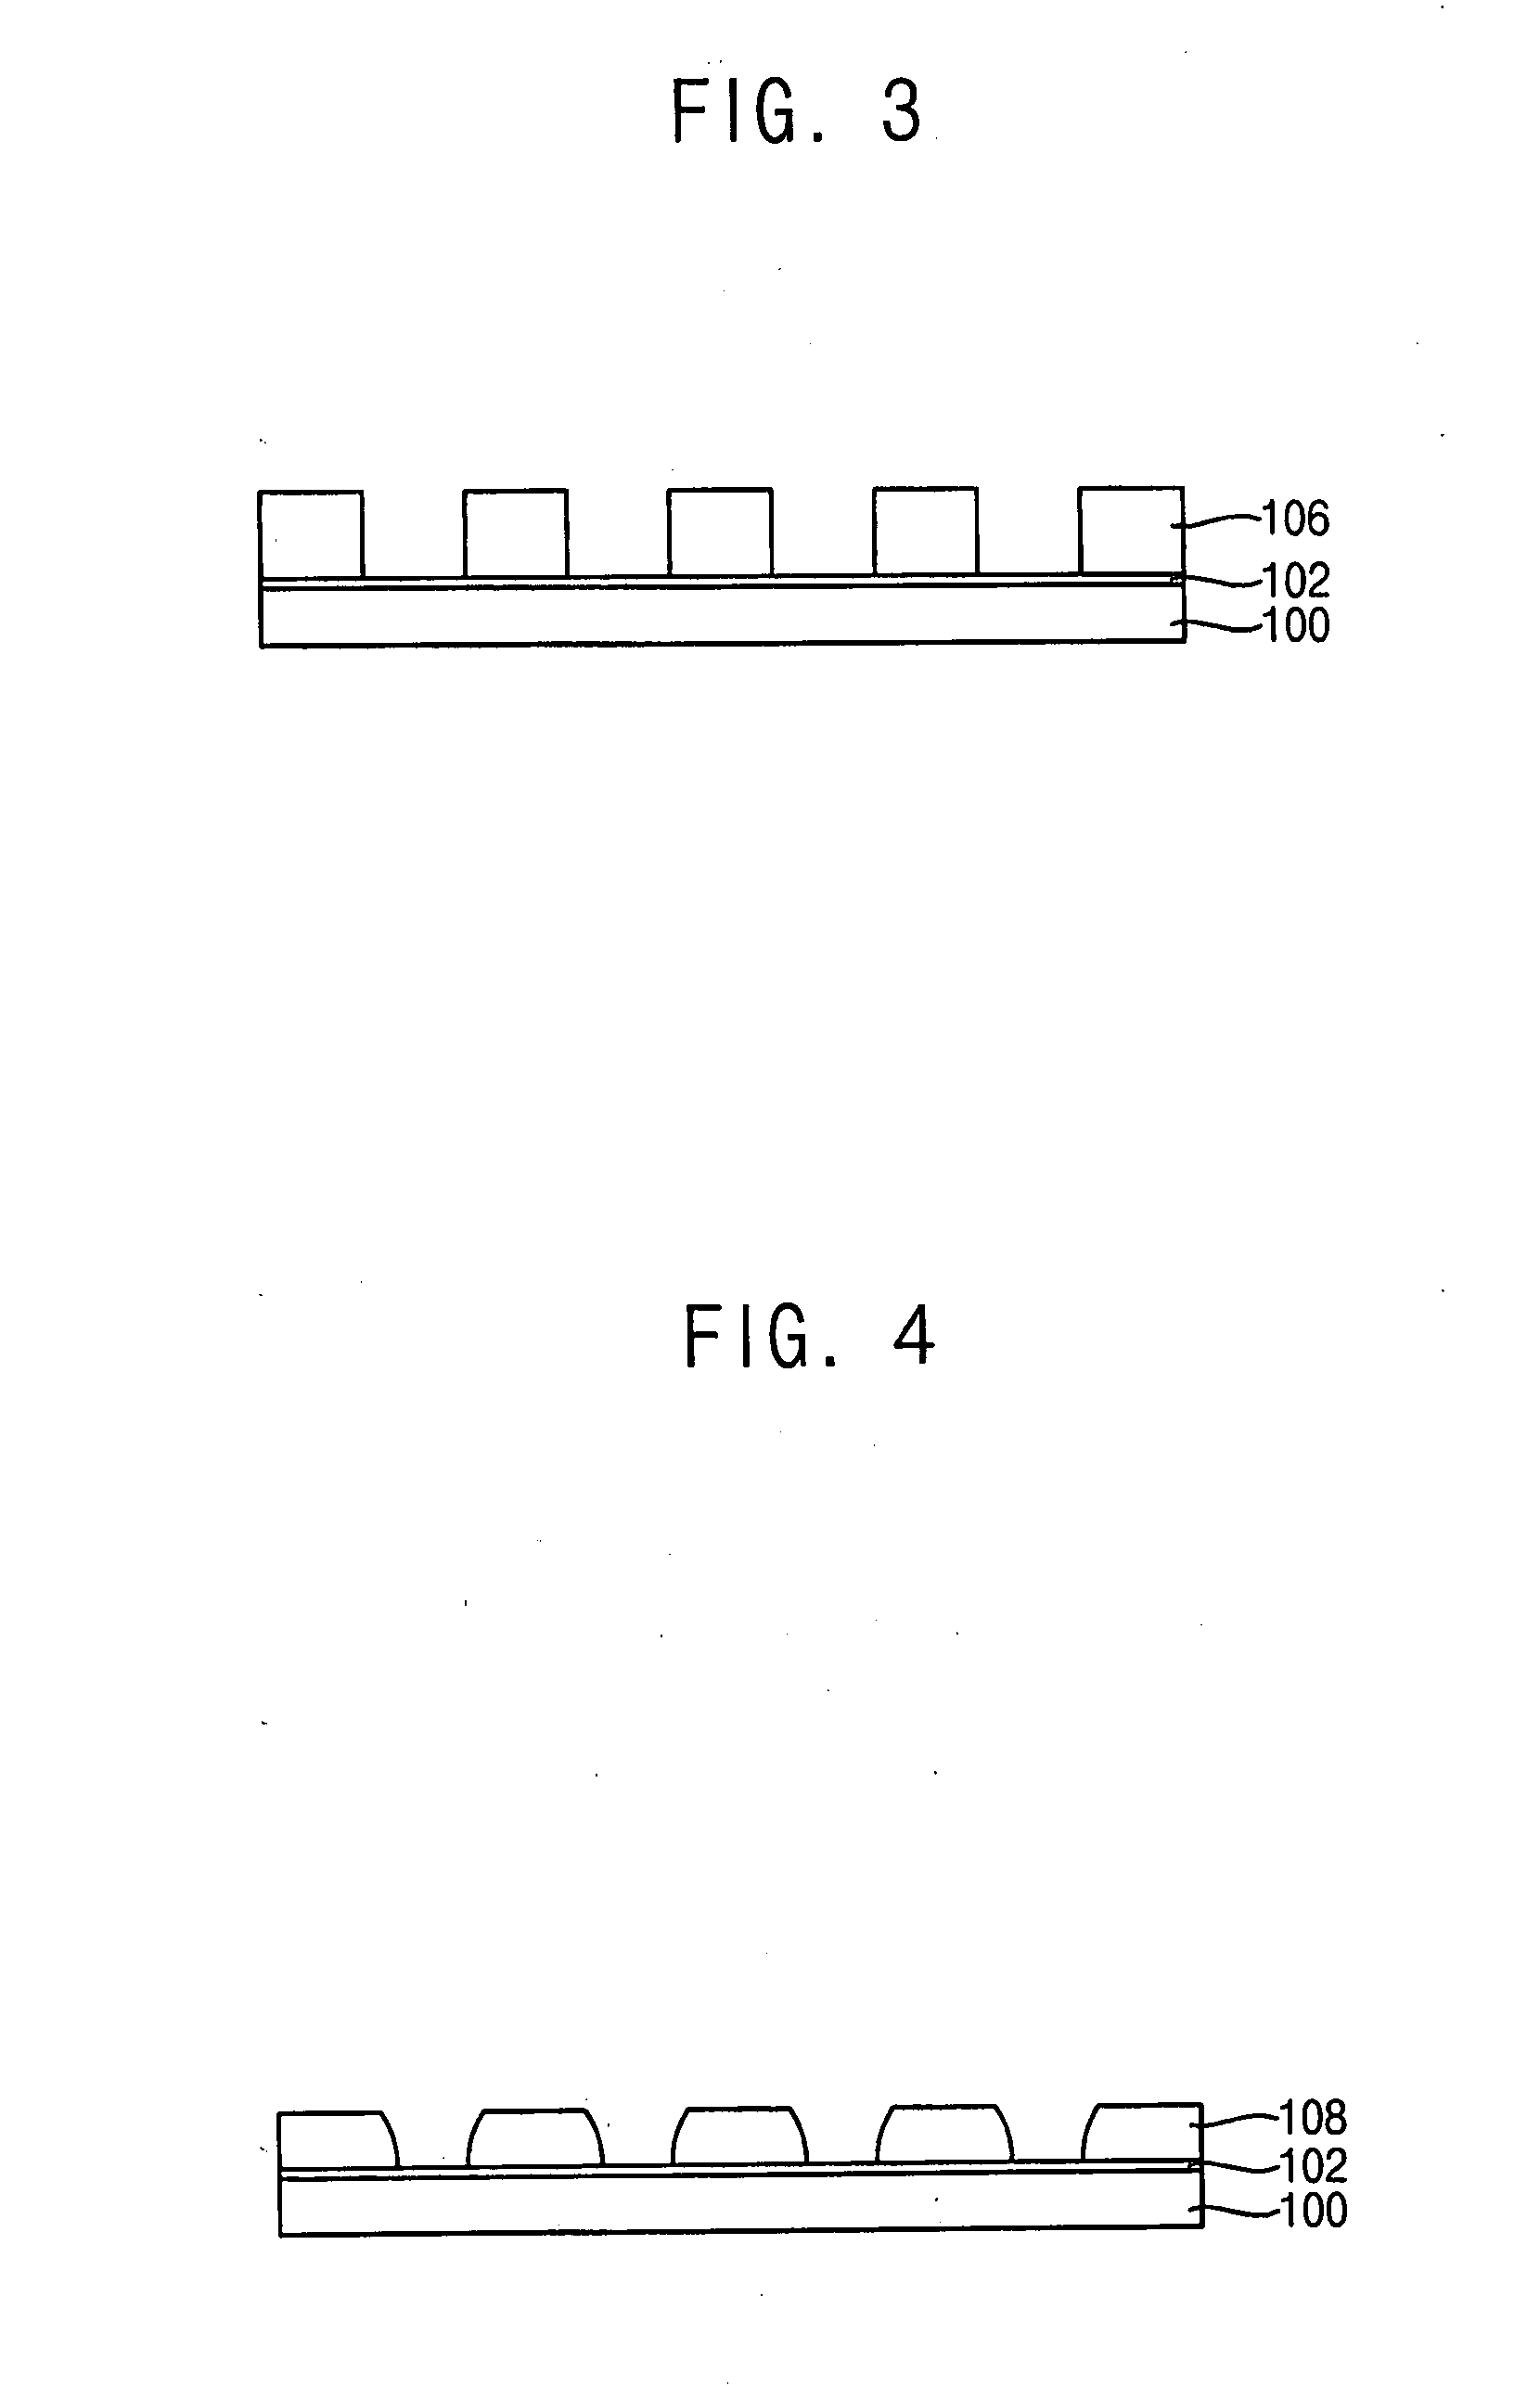 Photoresist compositions and methods of forming a pattern using the same